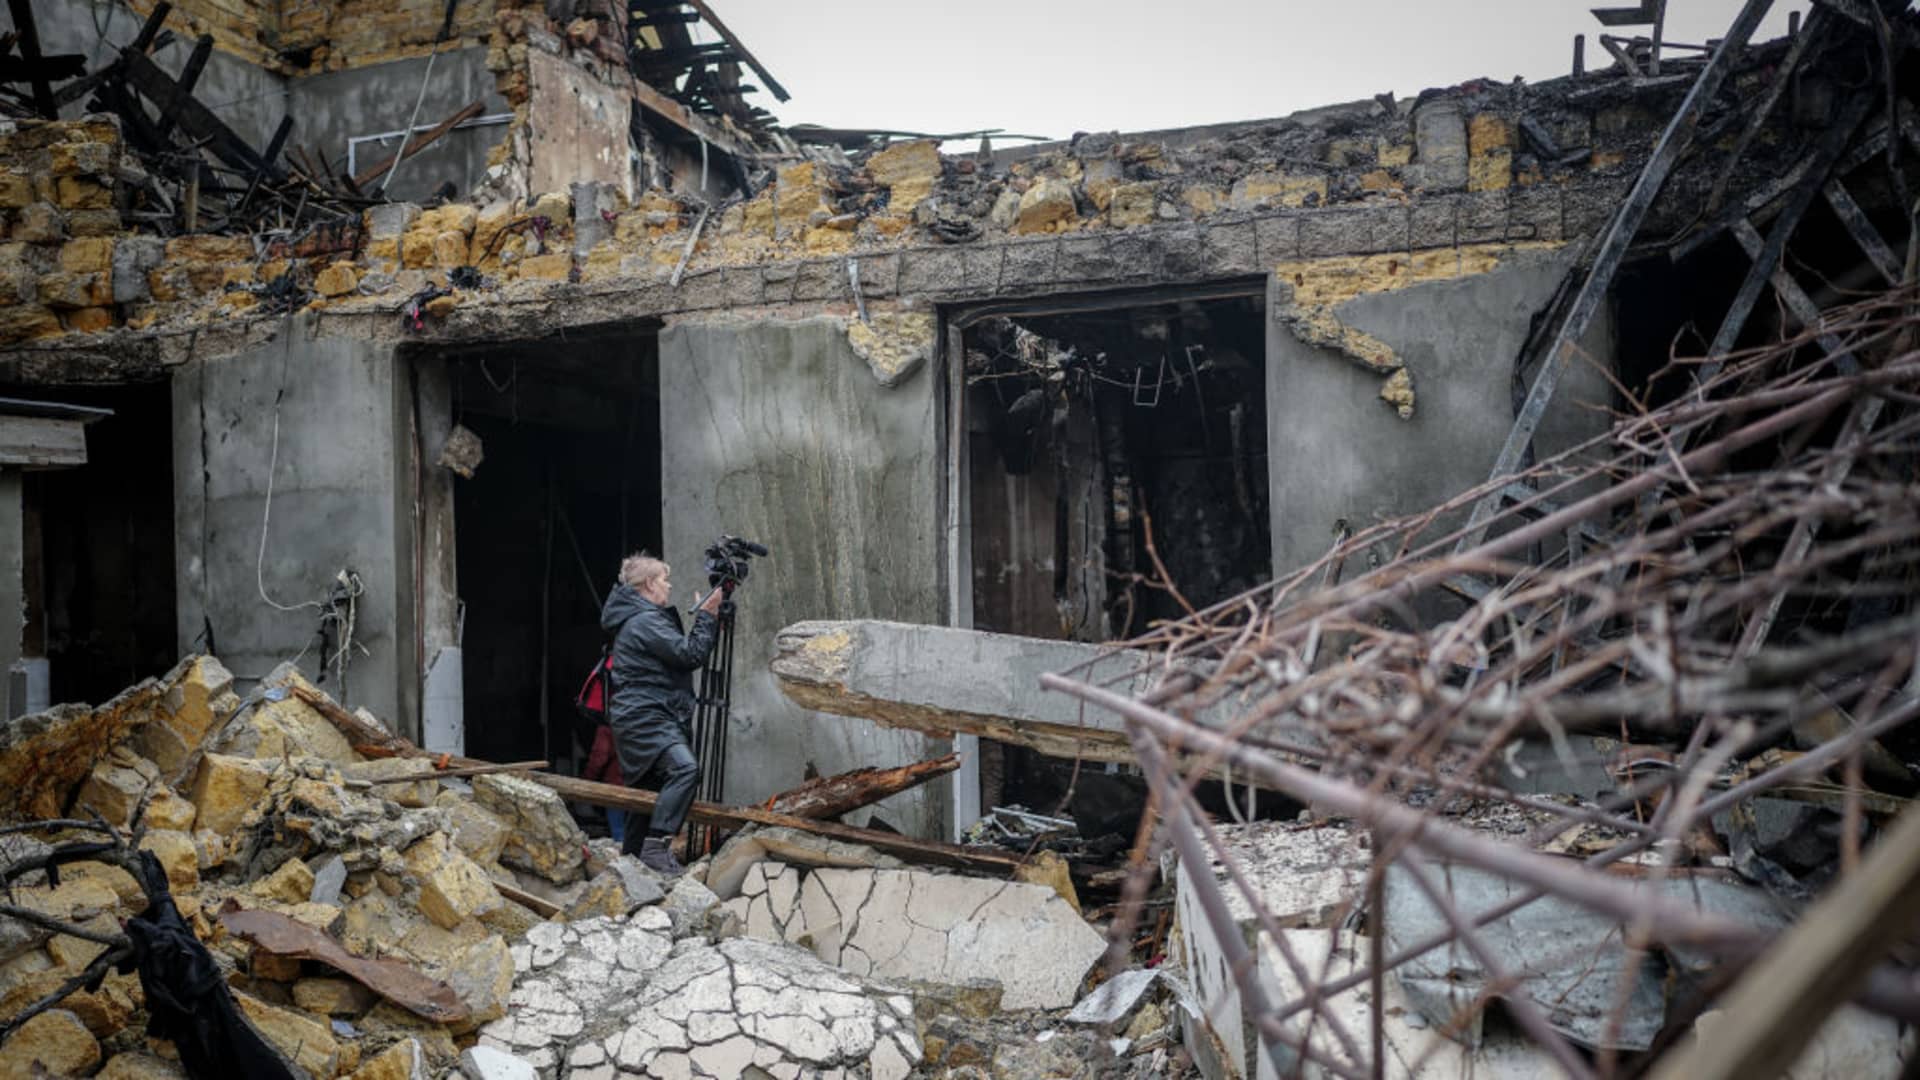 Latest news on Russia and the war in Ukraine